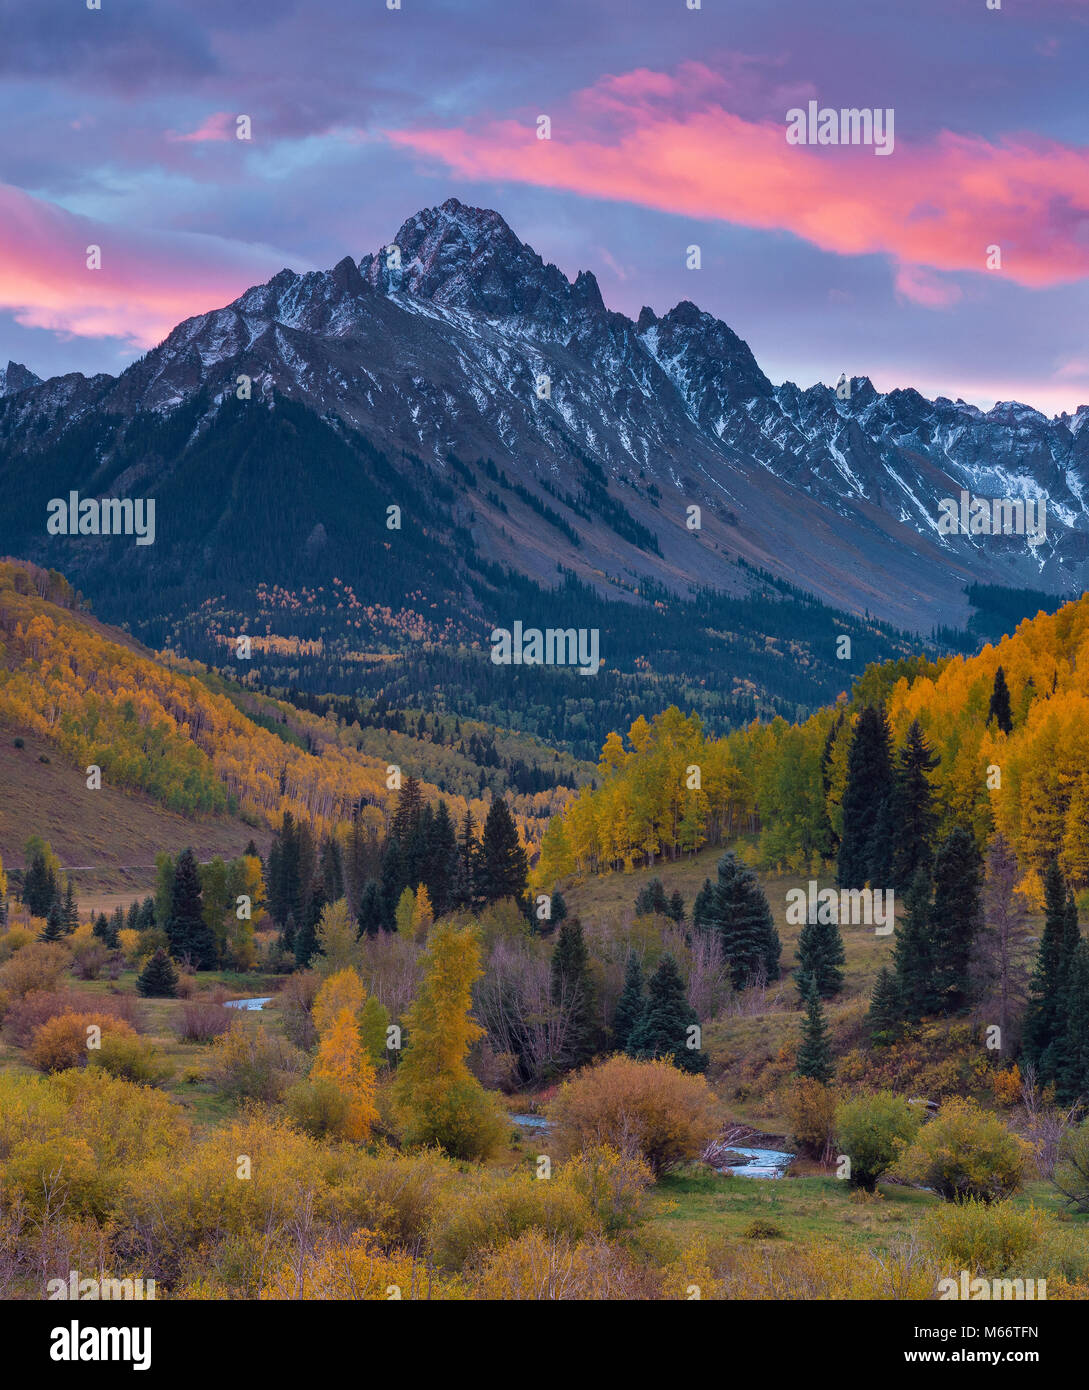 Dawn, Aspen, Willow Swamp, Mount Sneffels, Uncompahgre National Forest, Colorado Stock Photo